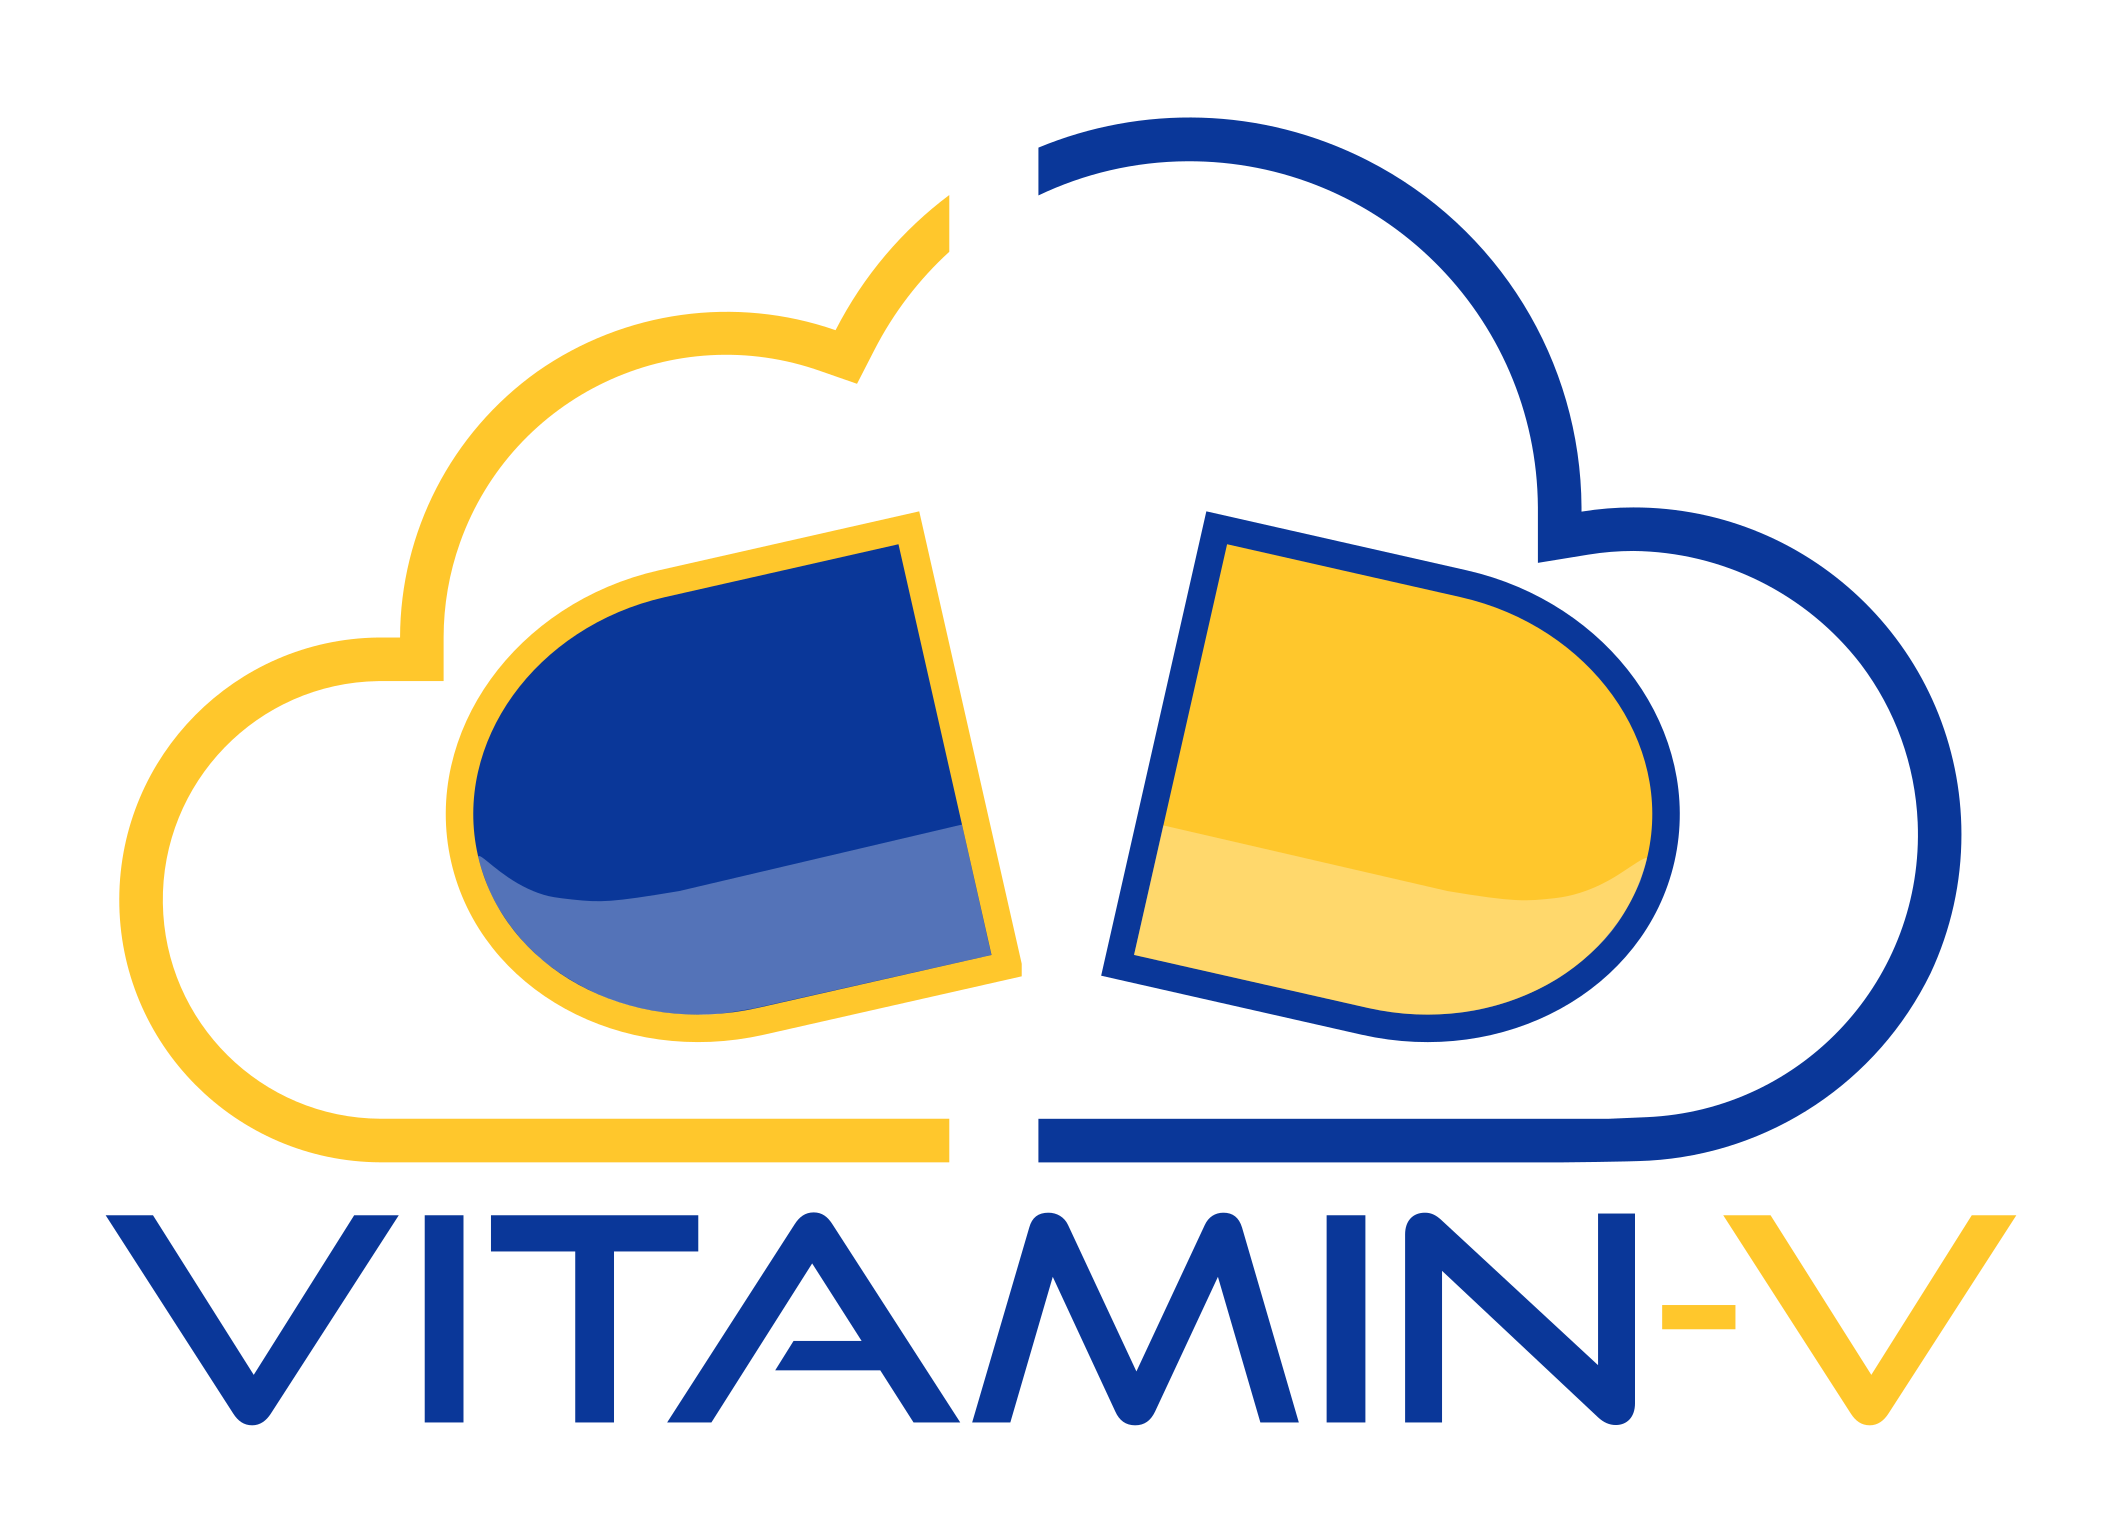 Virtual Environment and Tool-Boxing for Trustworthy Development of RISC-V based Cloud Services (Vitamin-V)